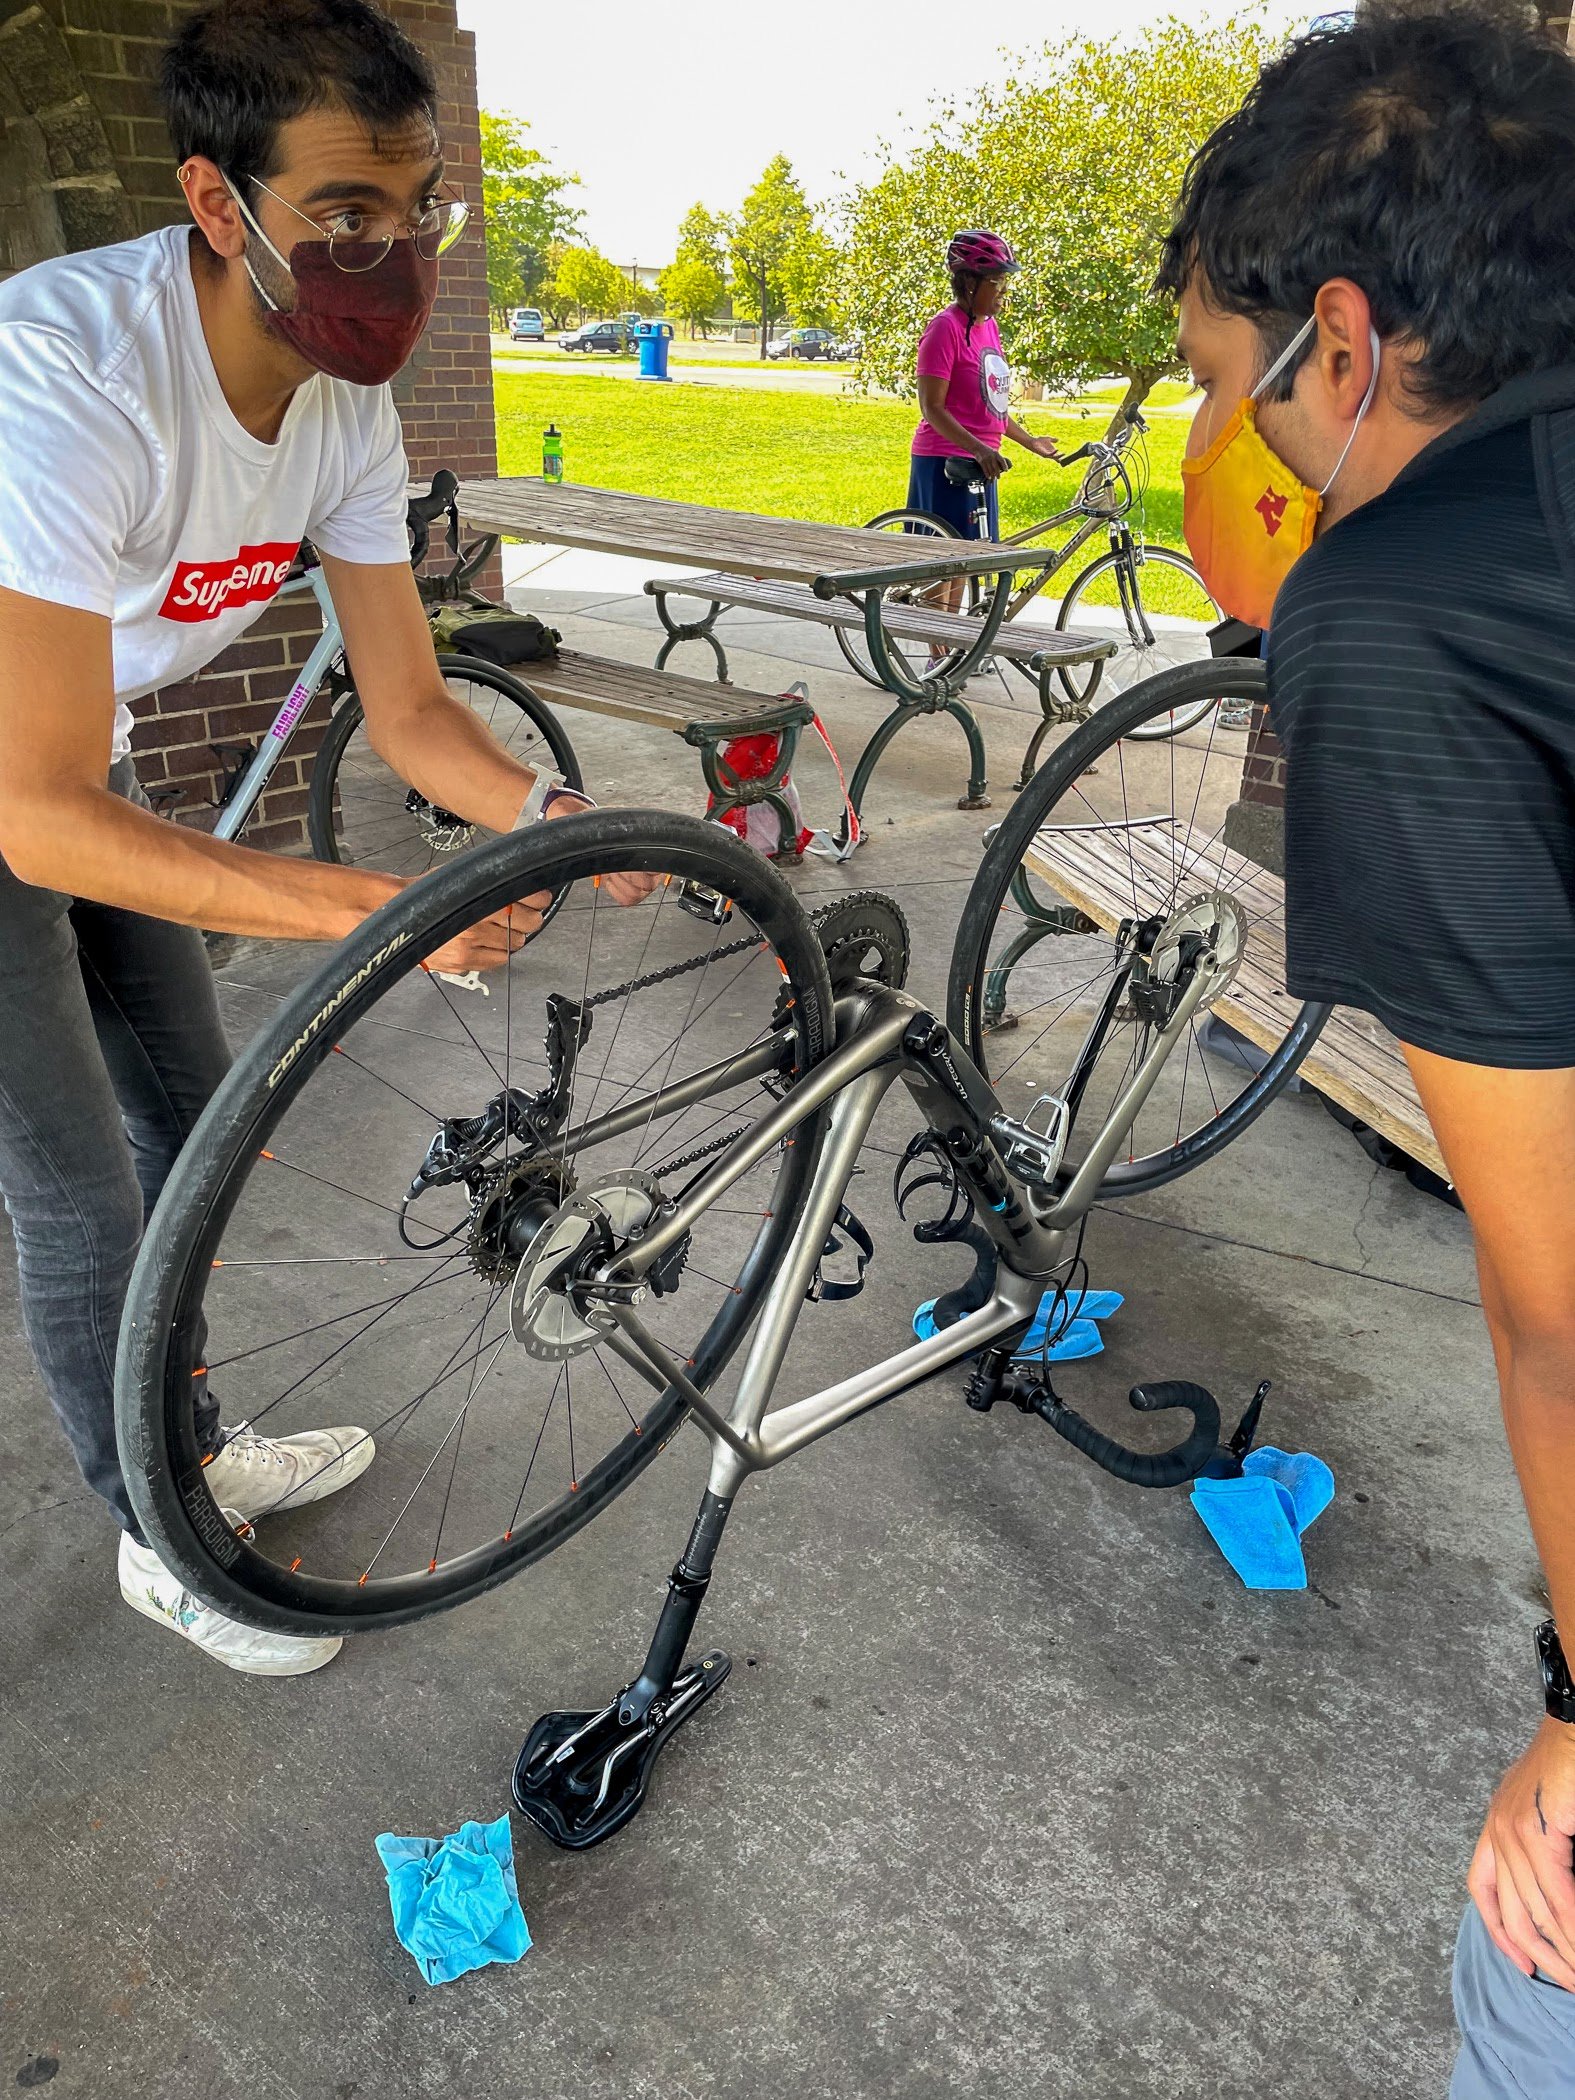  Pallav Kumar (left)  A person demonstrates how to fix a bike part outside under an outdoor pavilion. The bike is flipped upside down and another person watches. 